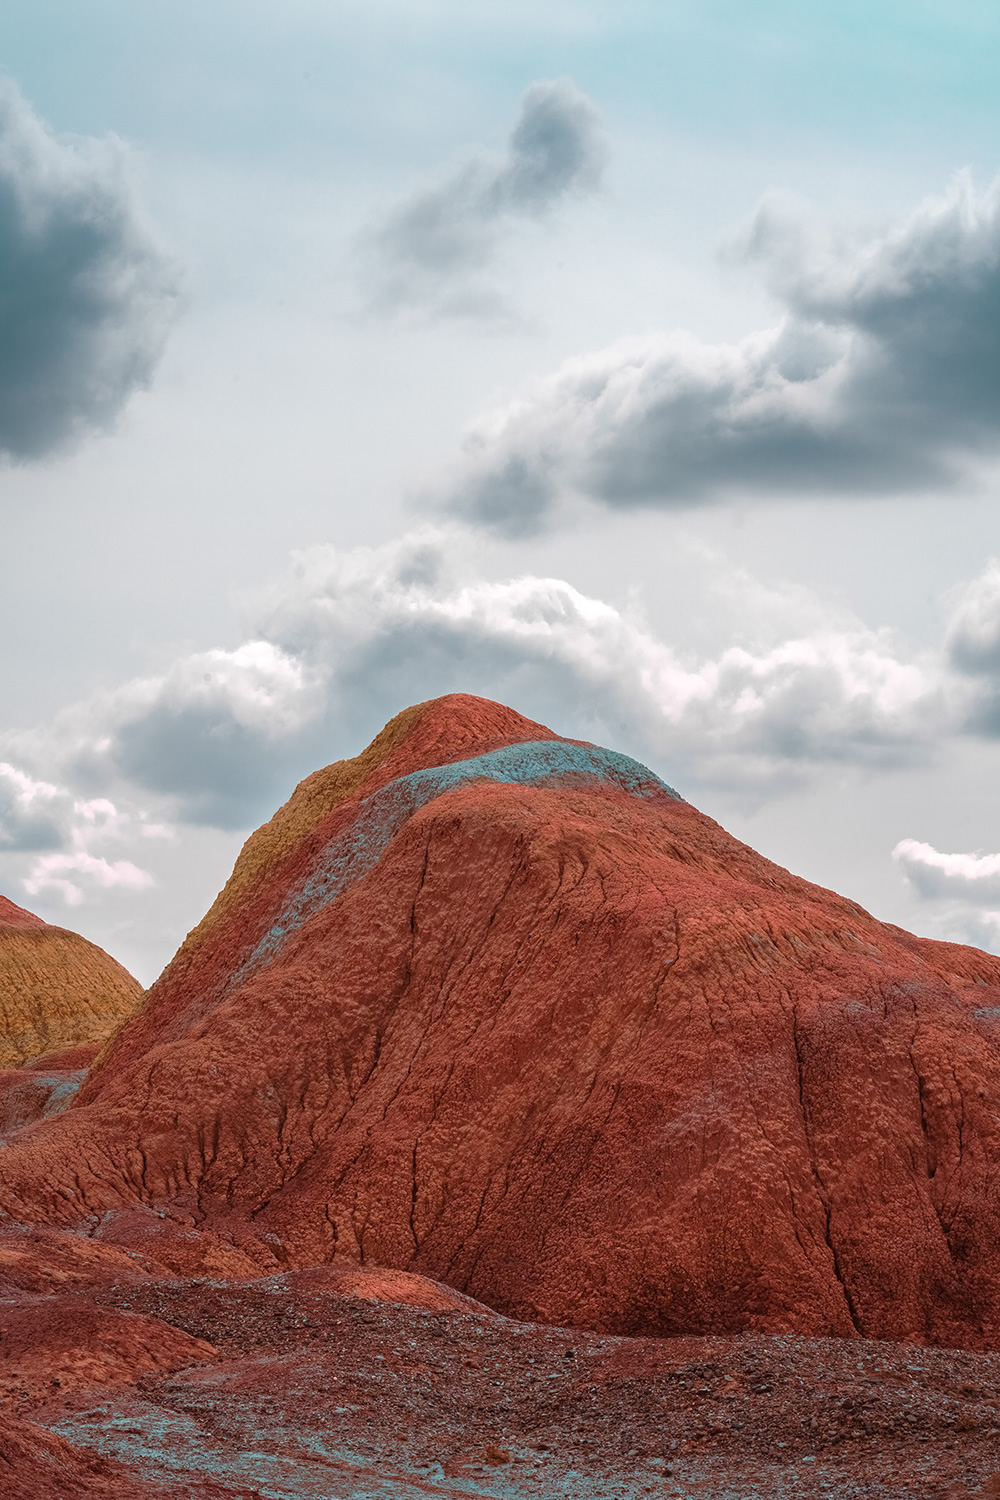 Red Beds: Beautiful Landscapes Of Himalayan Orogeny By Jonas Daley